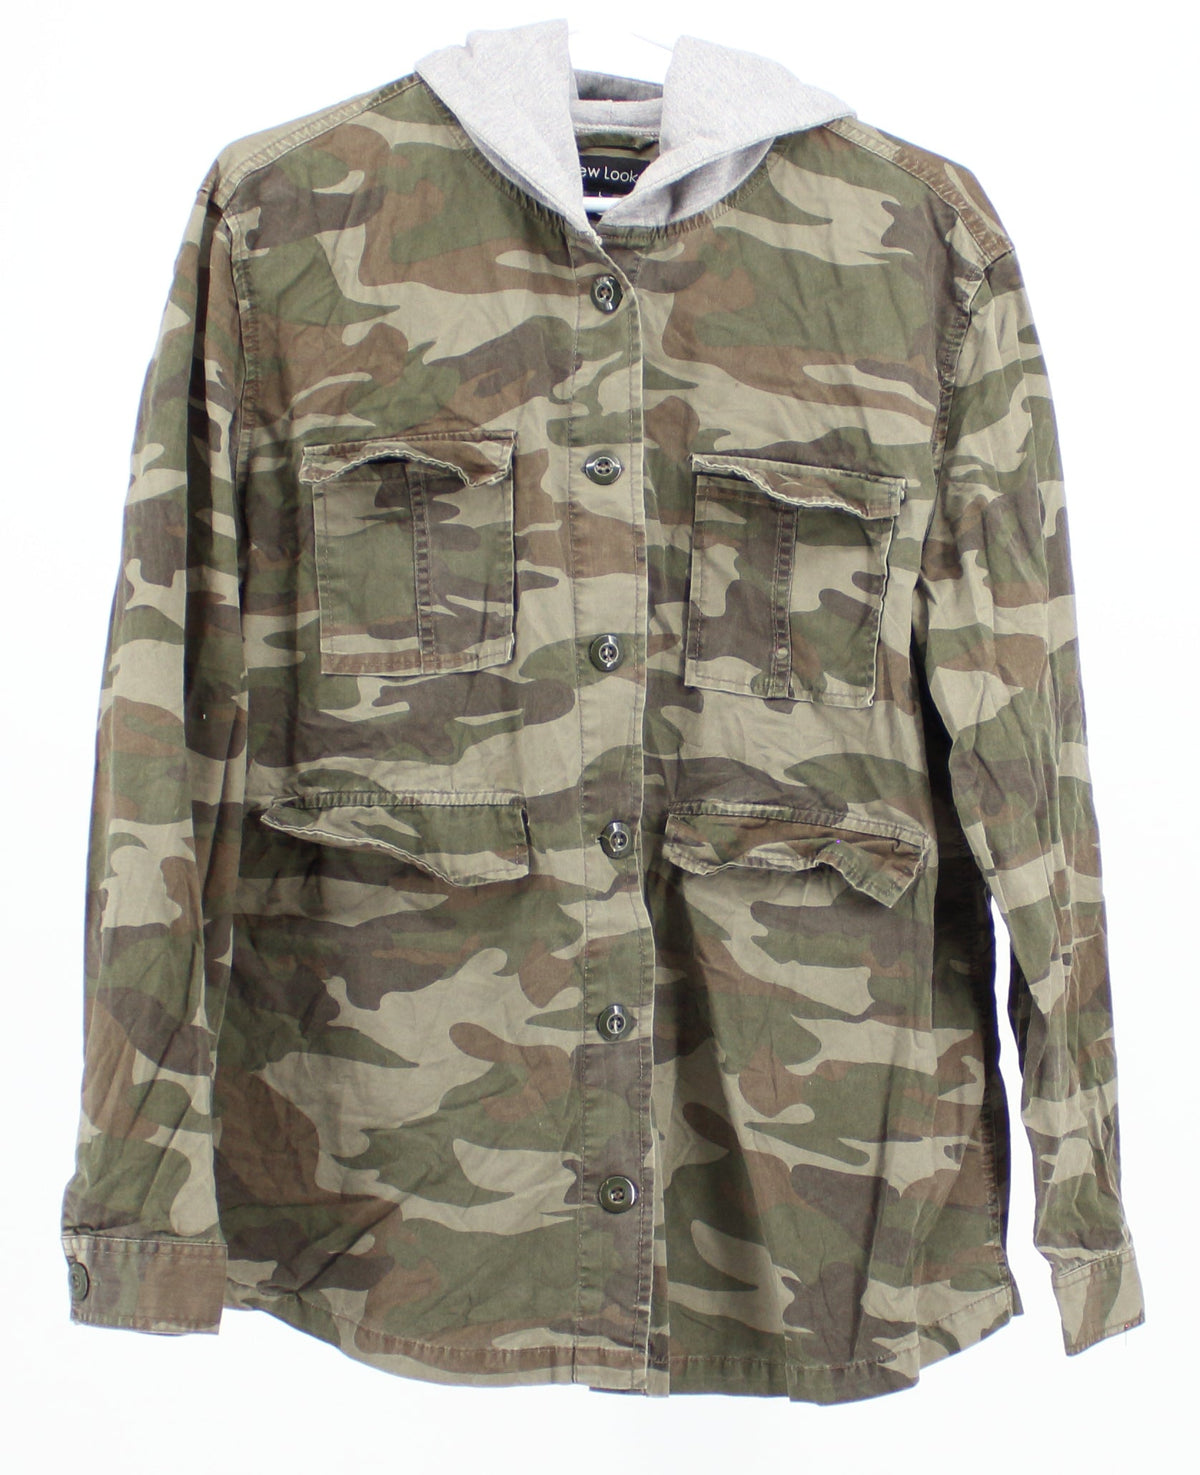 New Look Army Shirt With Hood